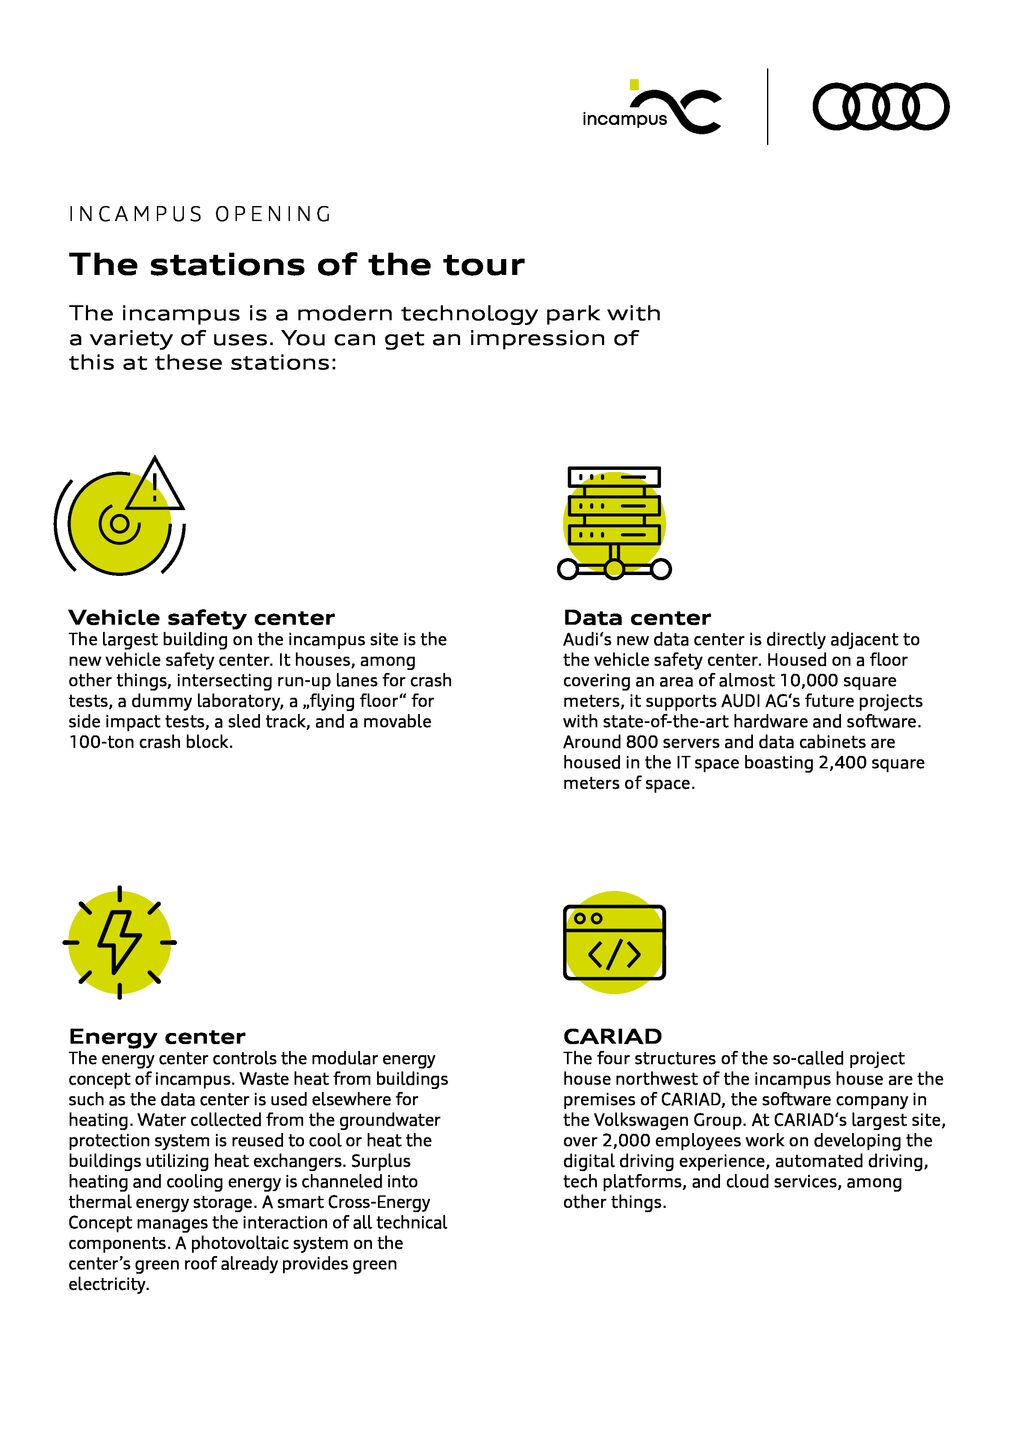 incampus - The stations of the tour